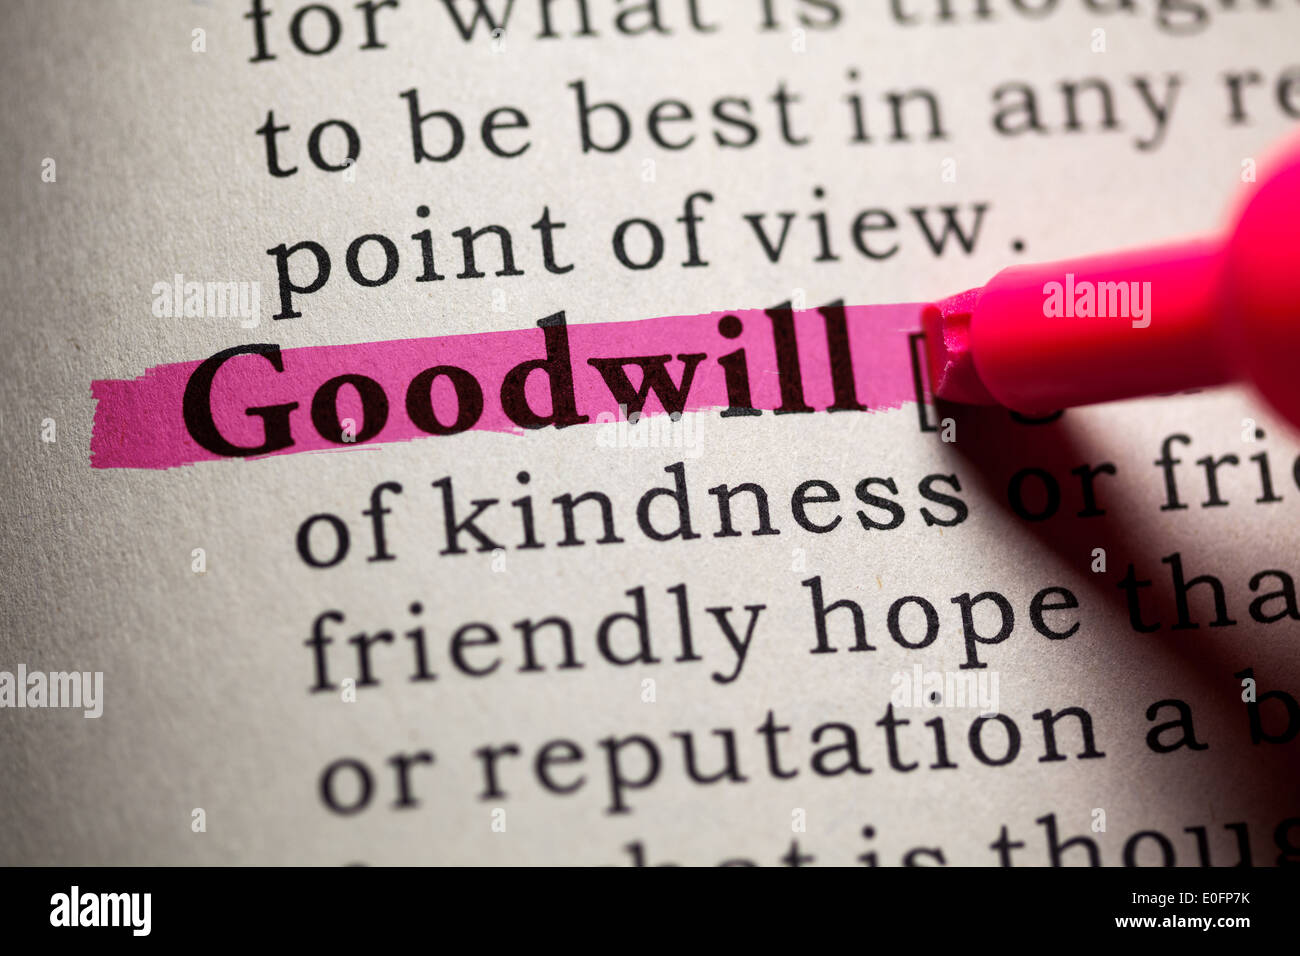 Fake Dictionary, Dictionary definition of the word goodwill. Stock Photo